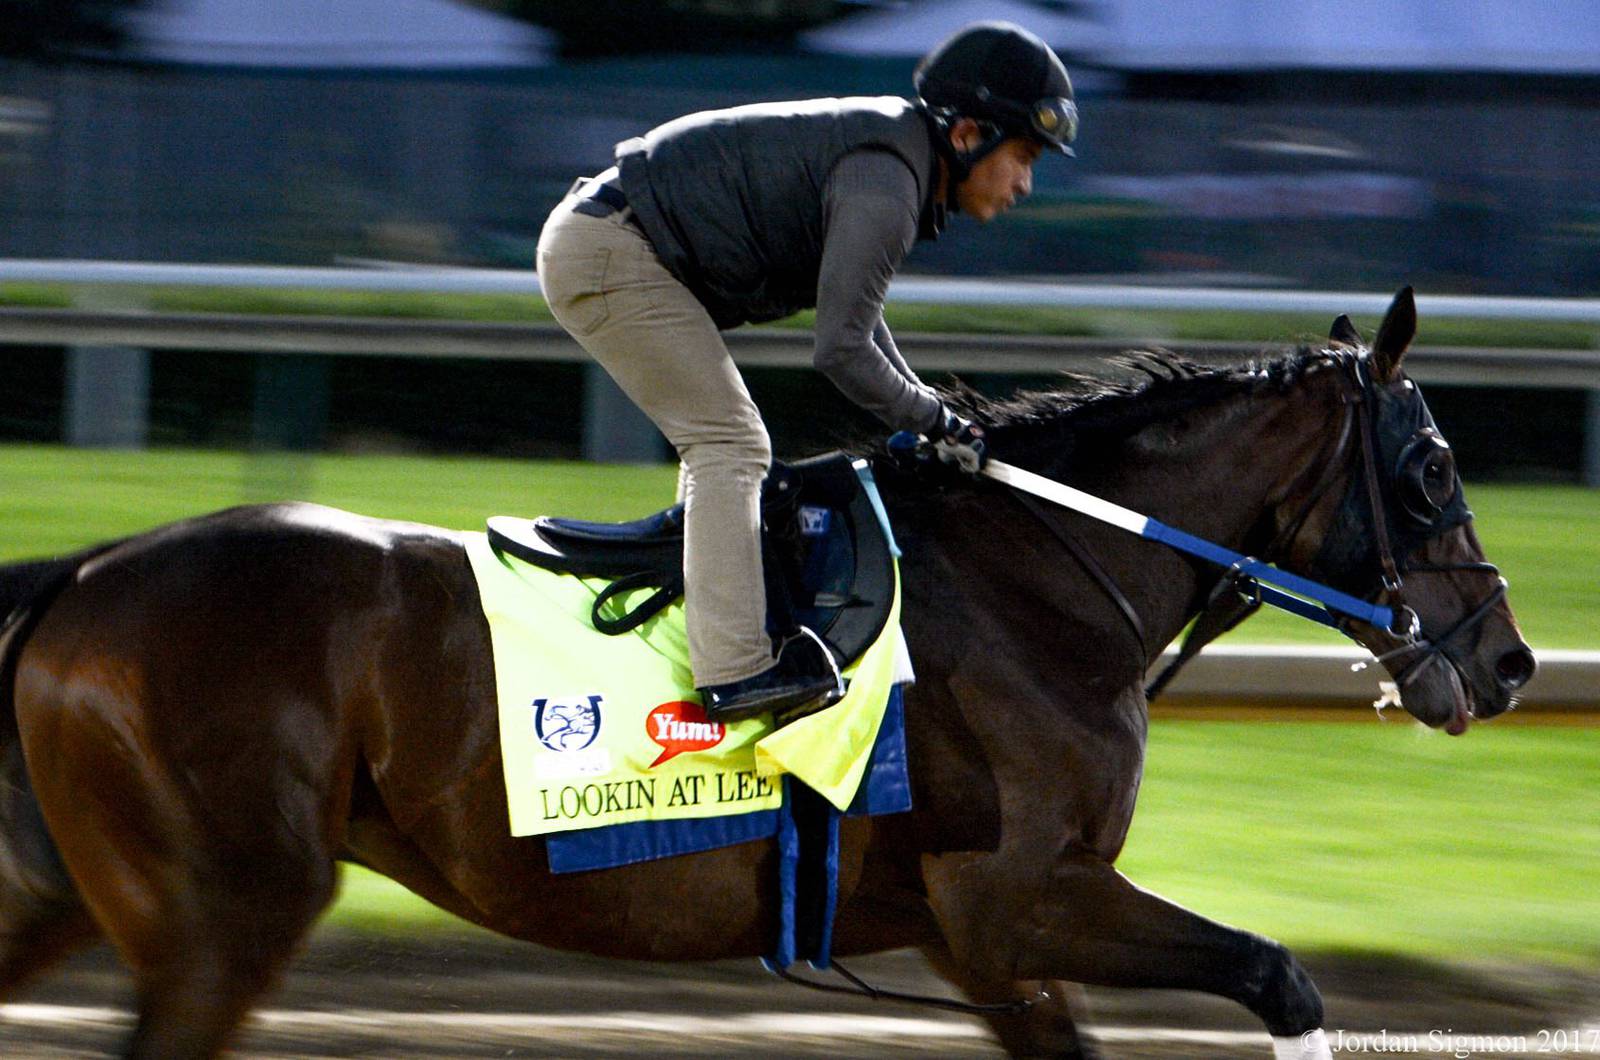 Tulsaowned horse to run in the Kentucky Derby 102.3 KRMG